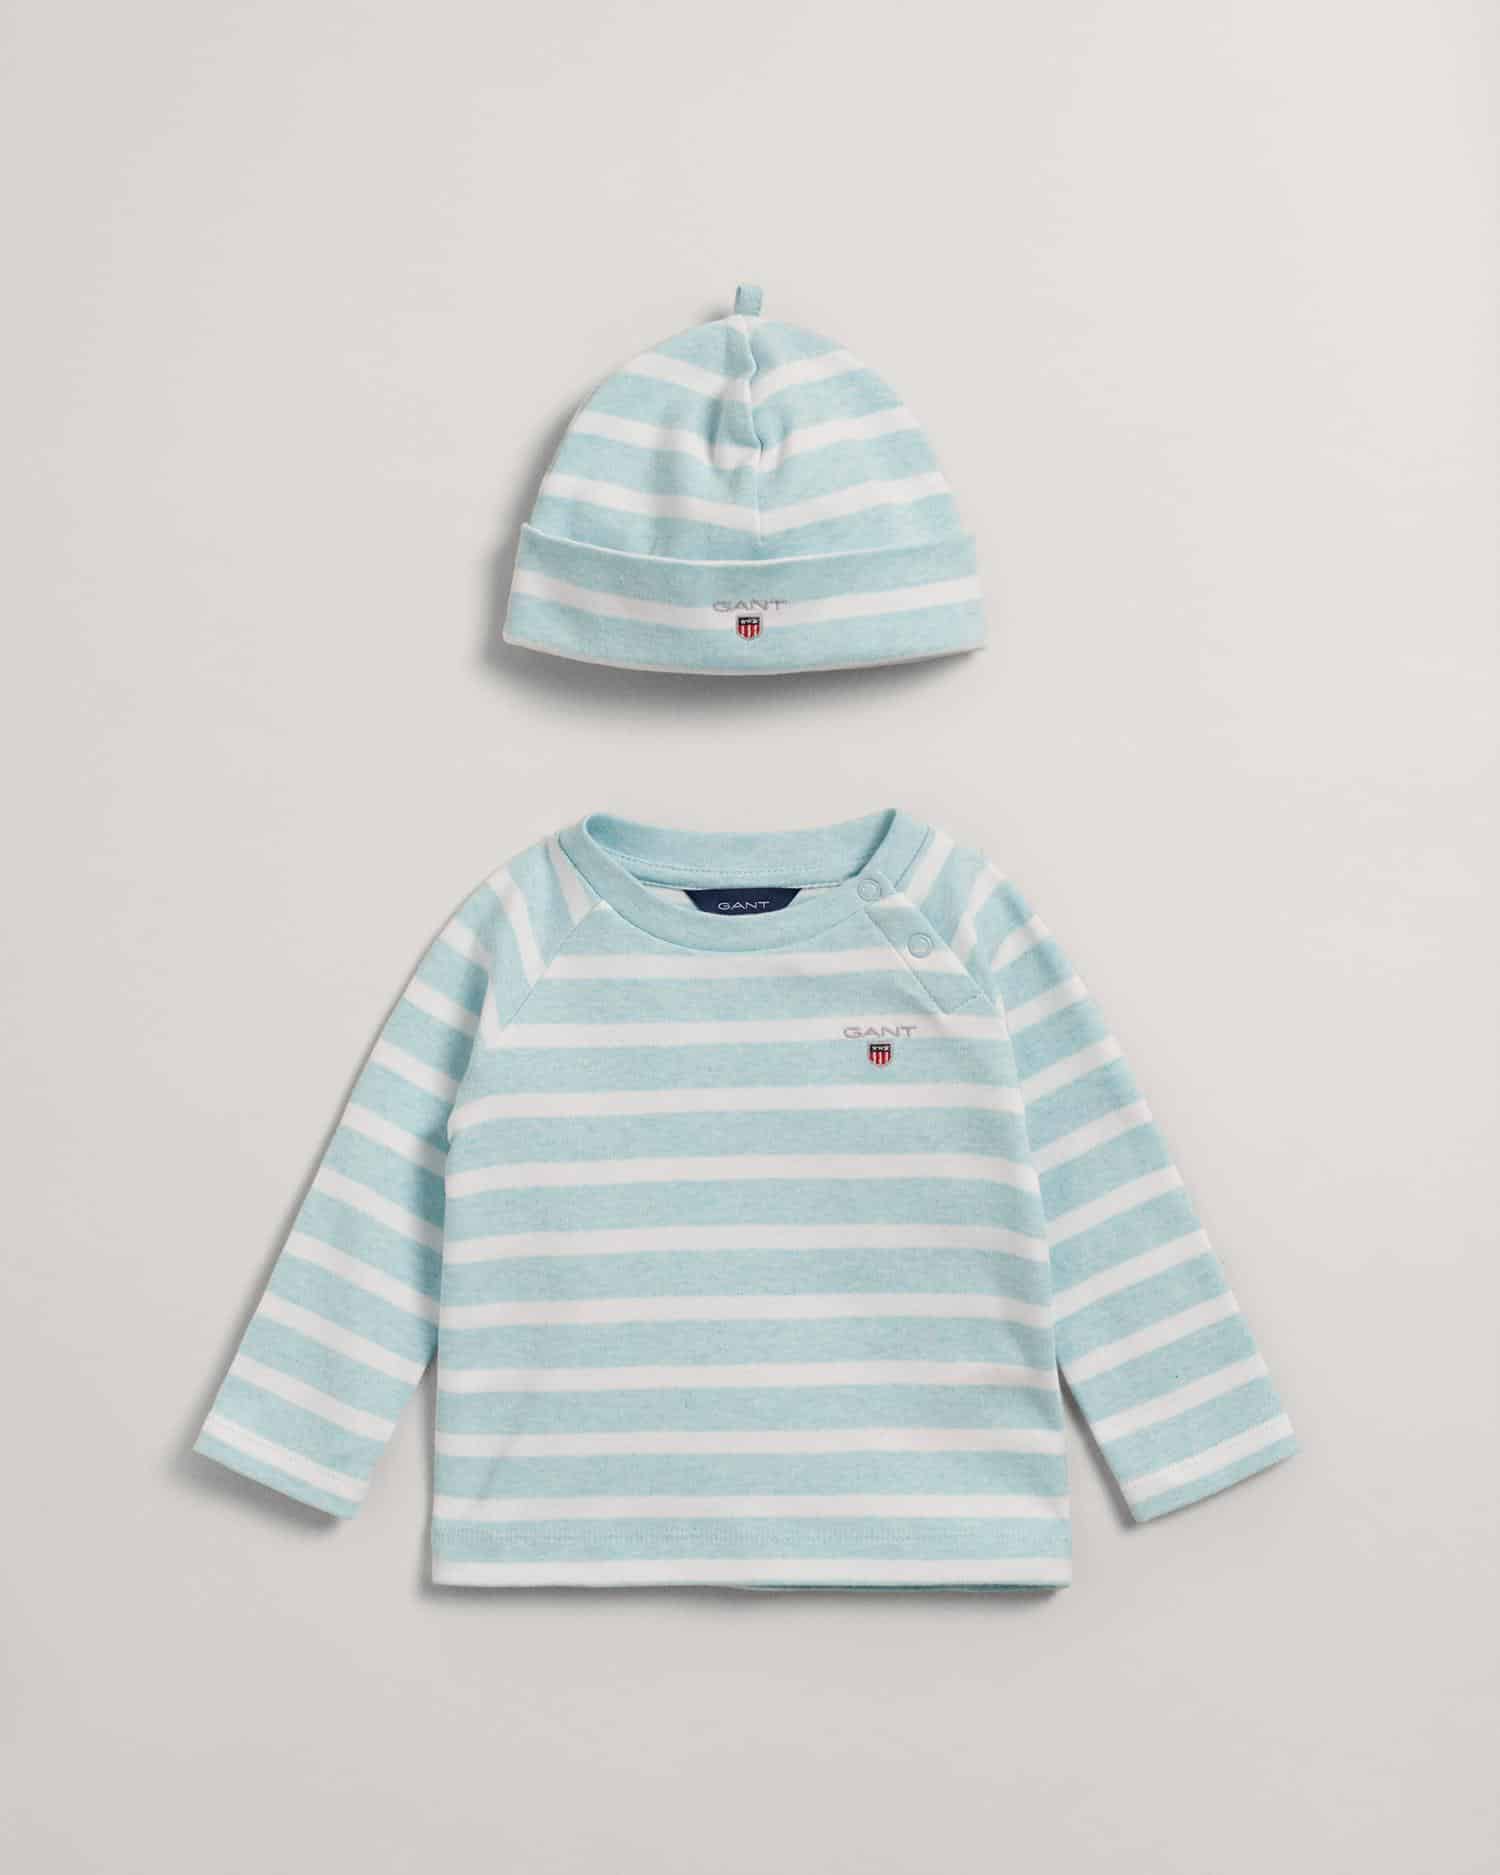 Gant baby pale blue set striped set - top and matching hat